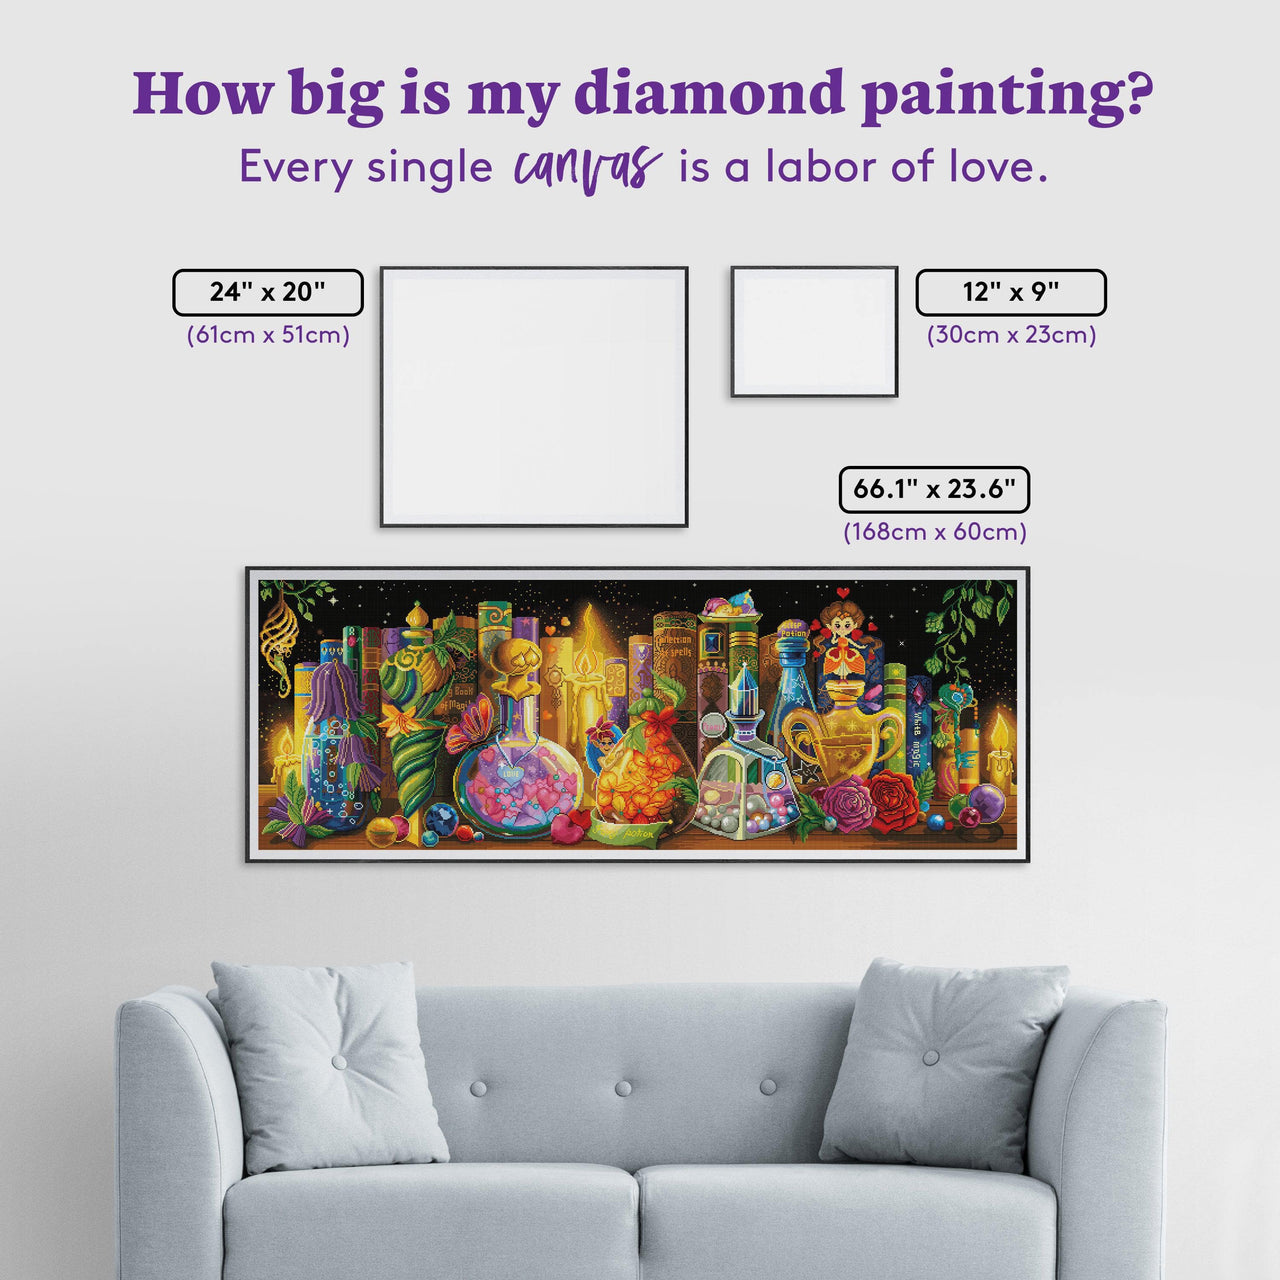 Diamond Painting Magic Potion 66.1" x 23.6" (168cm x 60cm) / Square With 71 Colors Including 4 ABs / 161,760